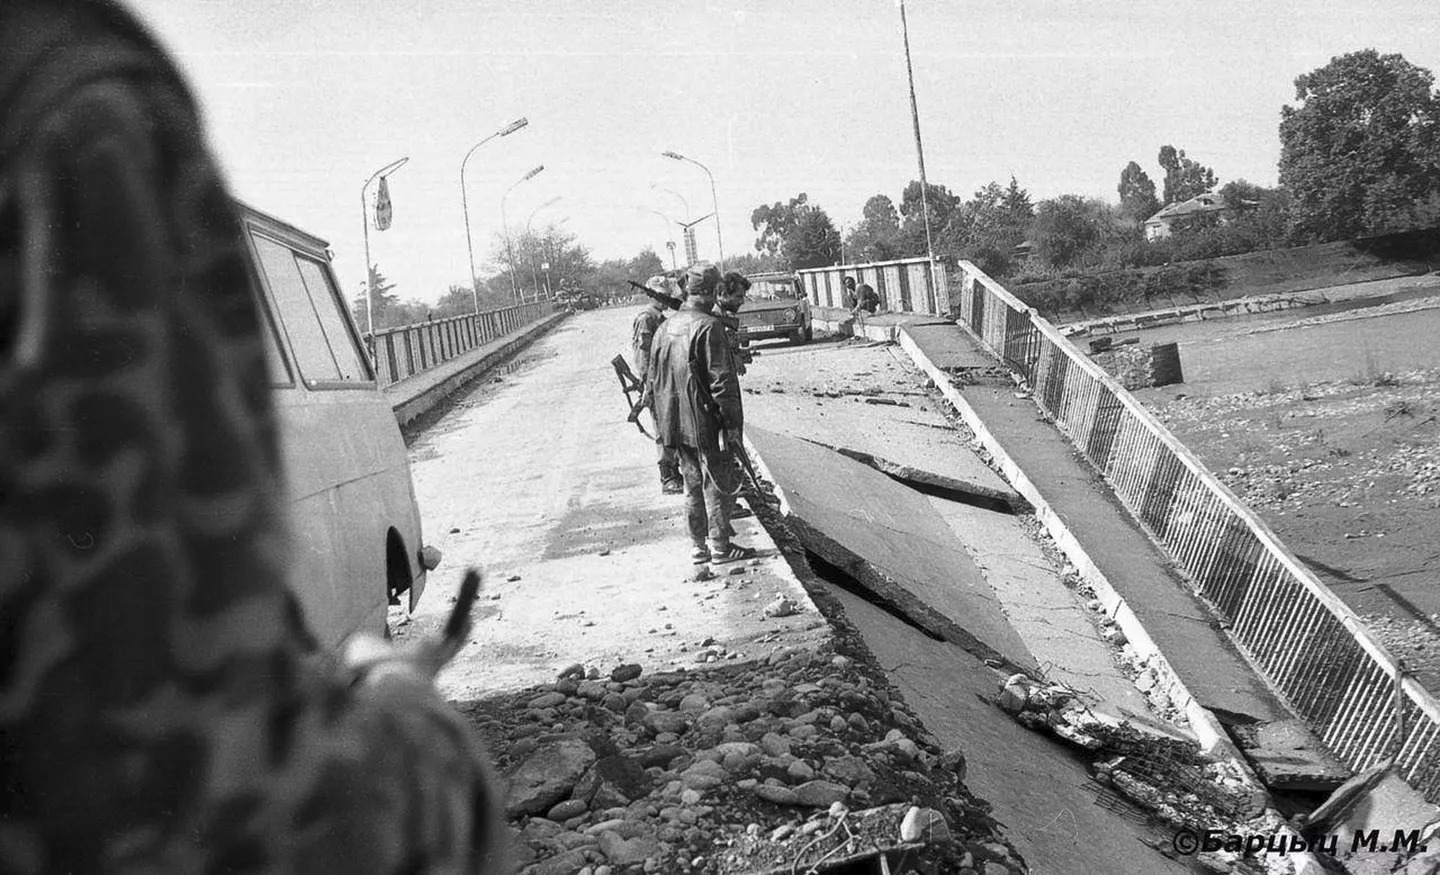 The task of the reconnaissance- and sabotage-group was not to let the enemy pass over the bridge in either direction, and also to blow up the bridge. The bridge was partially blown up. 